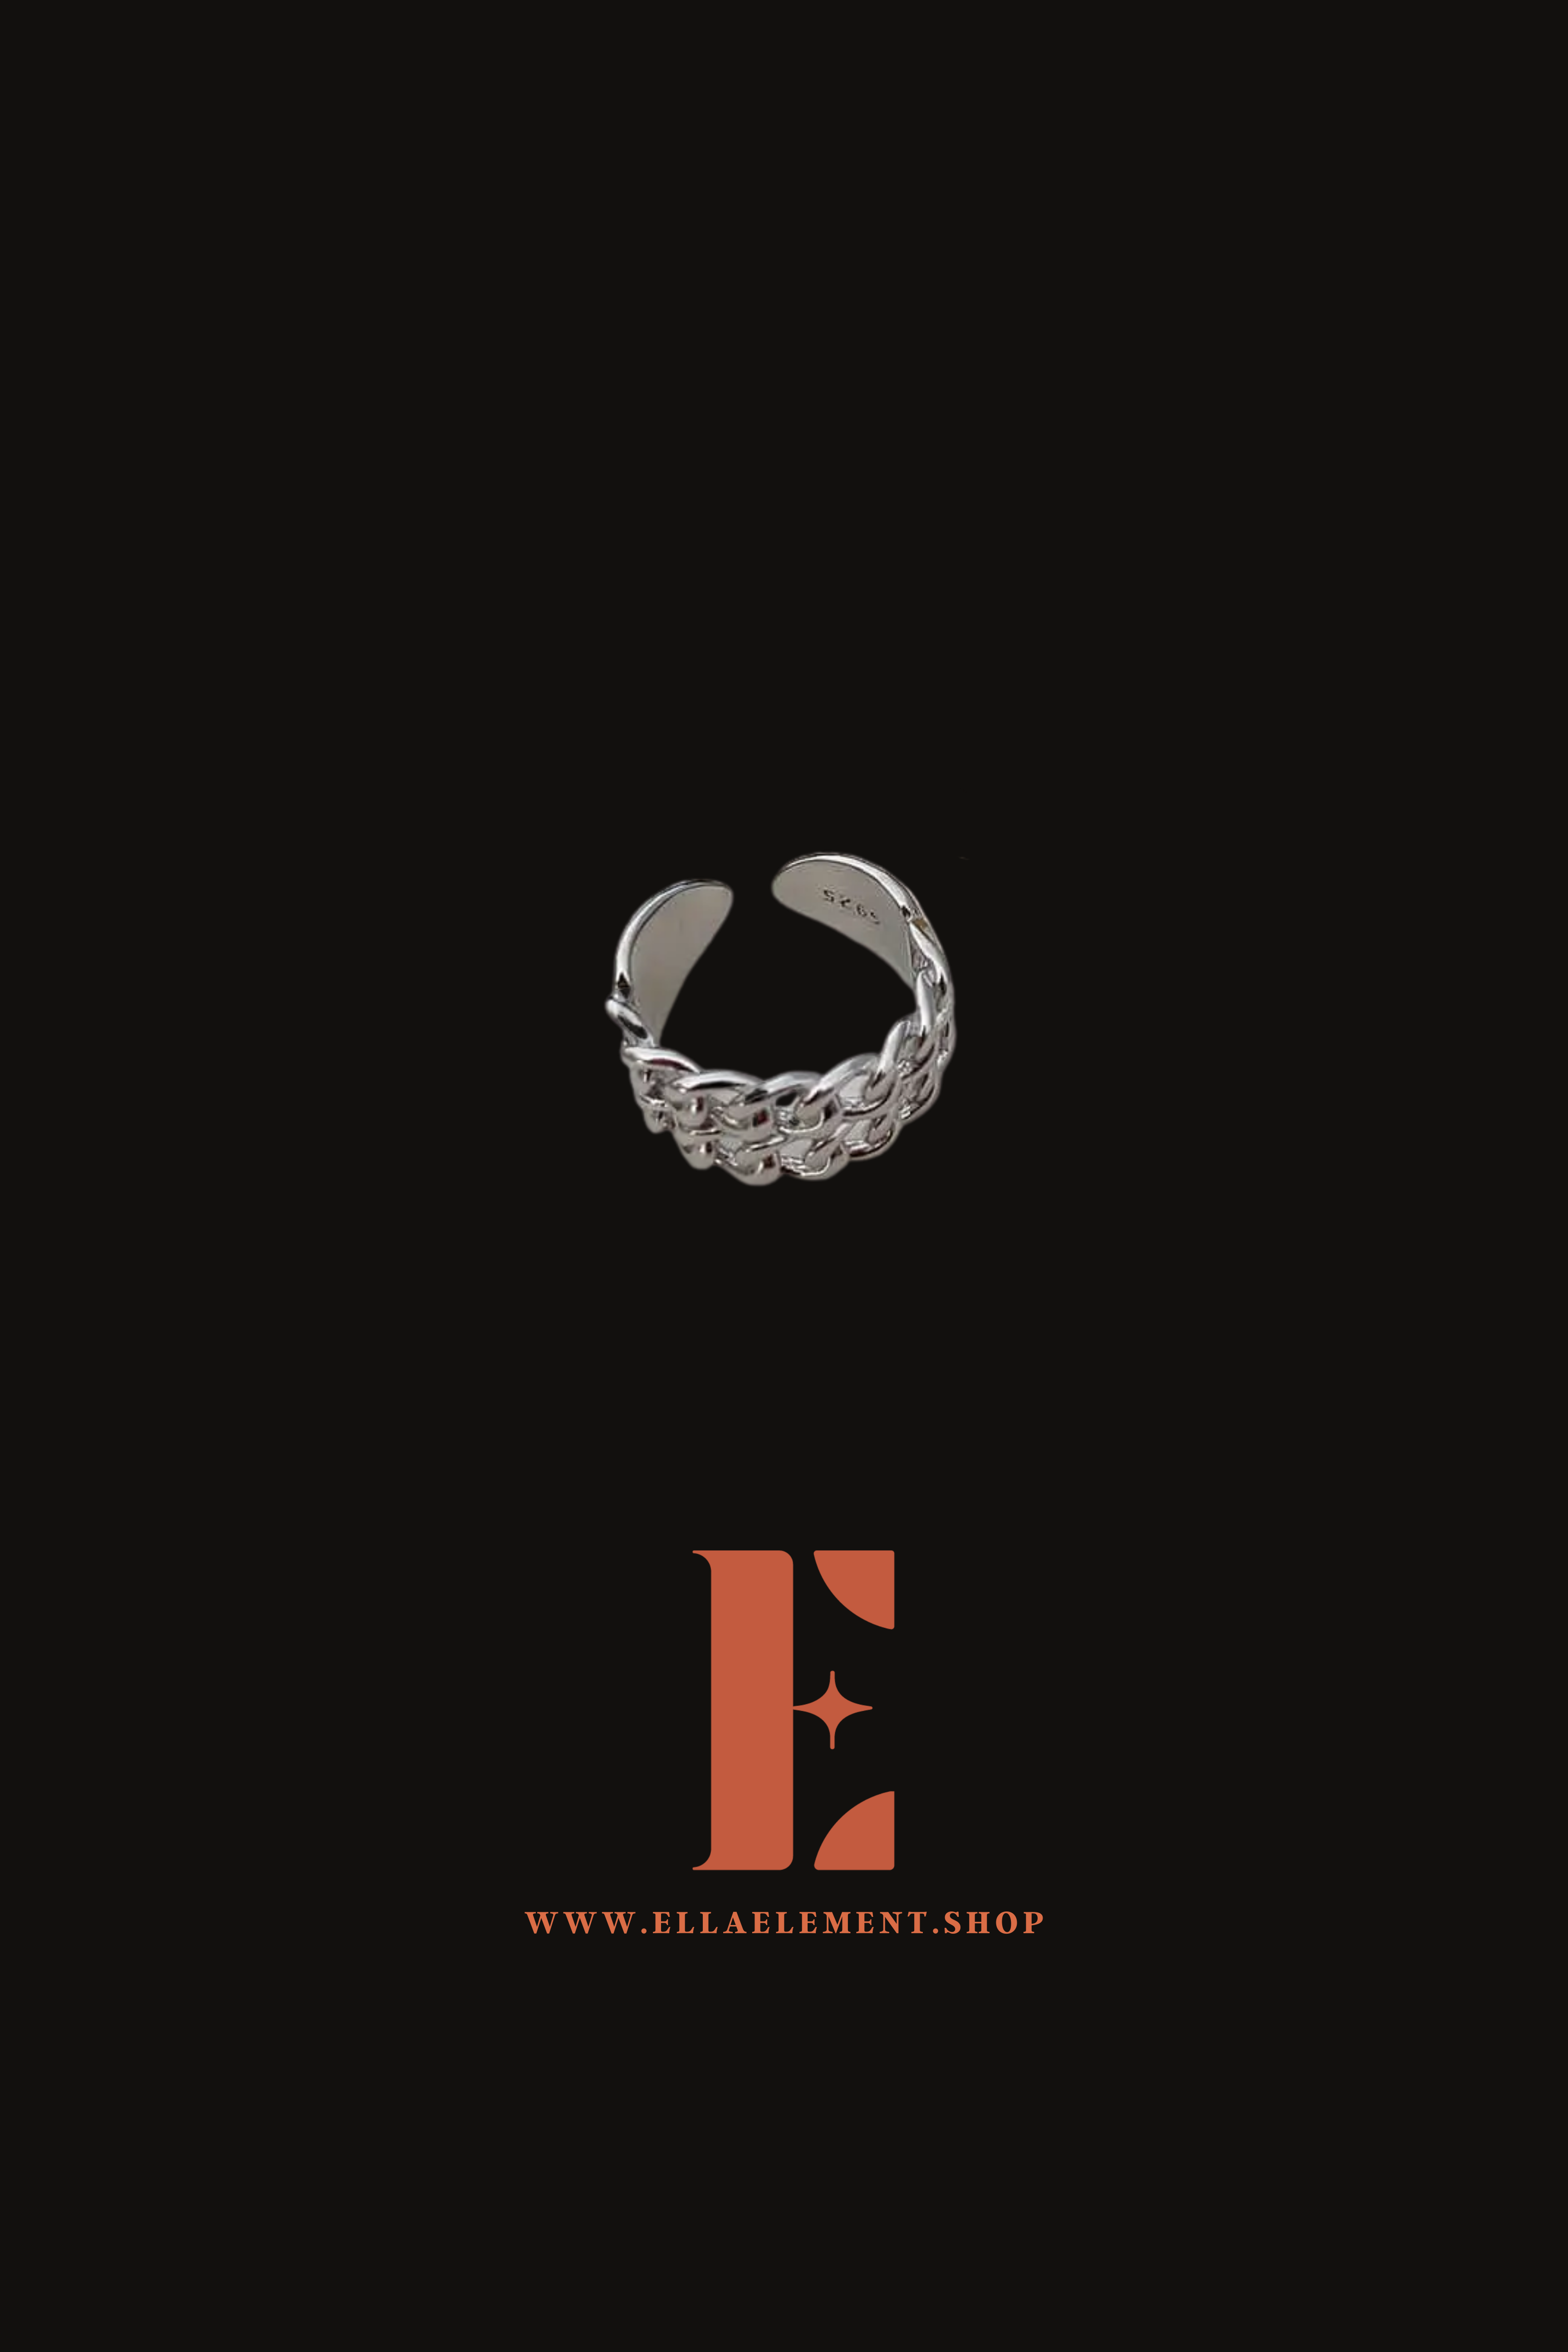 18k silver braided ring. Under the ring is the E's Element logo in orange. Platinum Double Band Ring by E's Element.